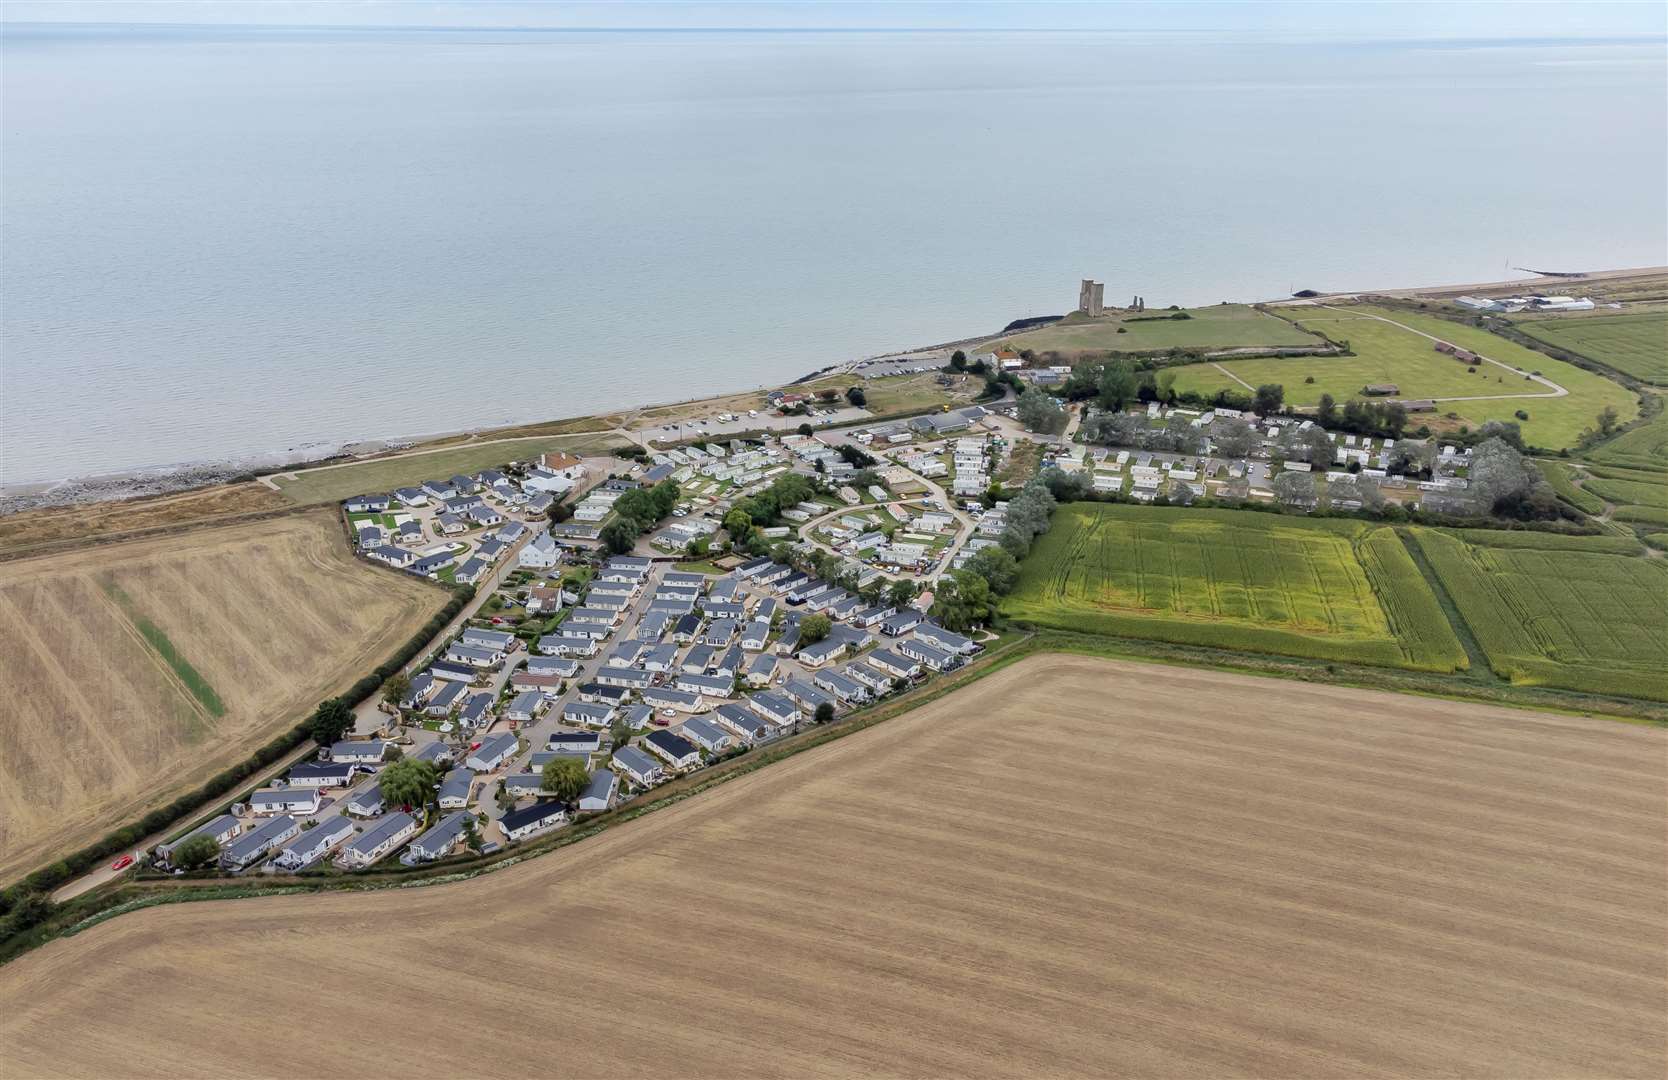 The Reculver site from the air